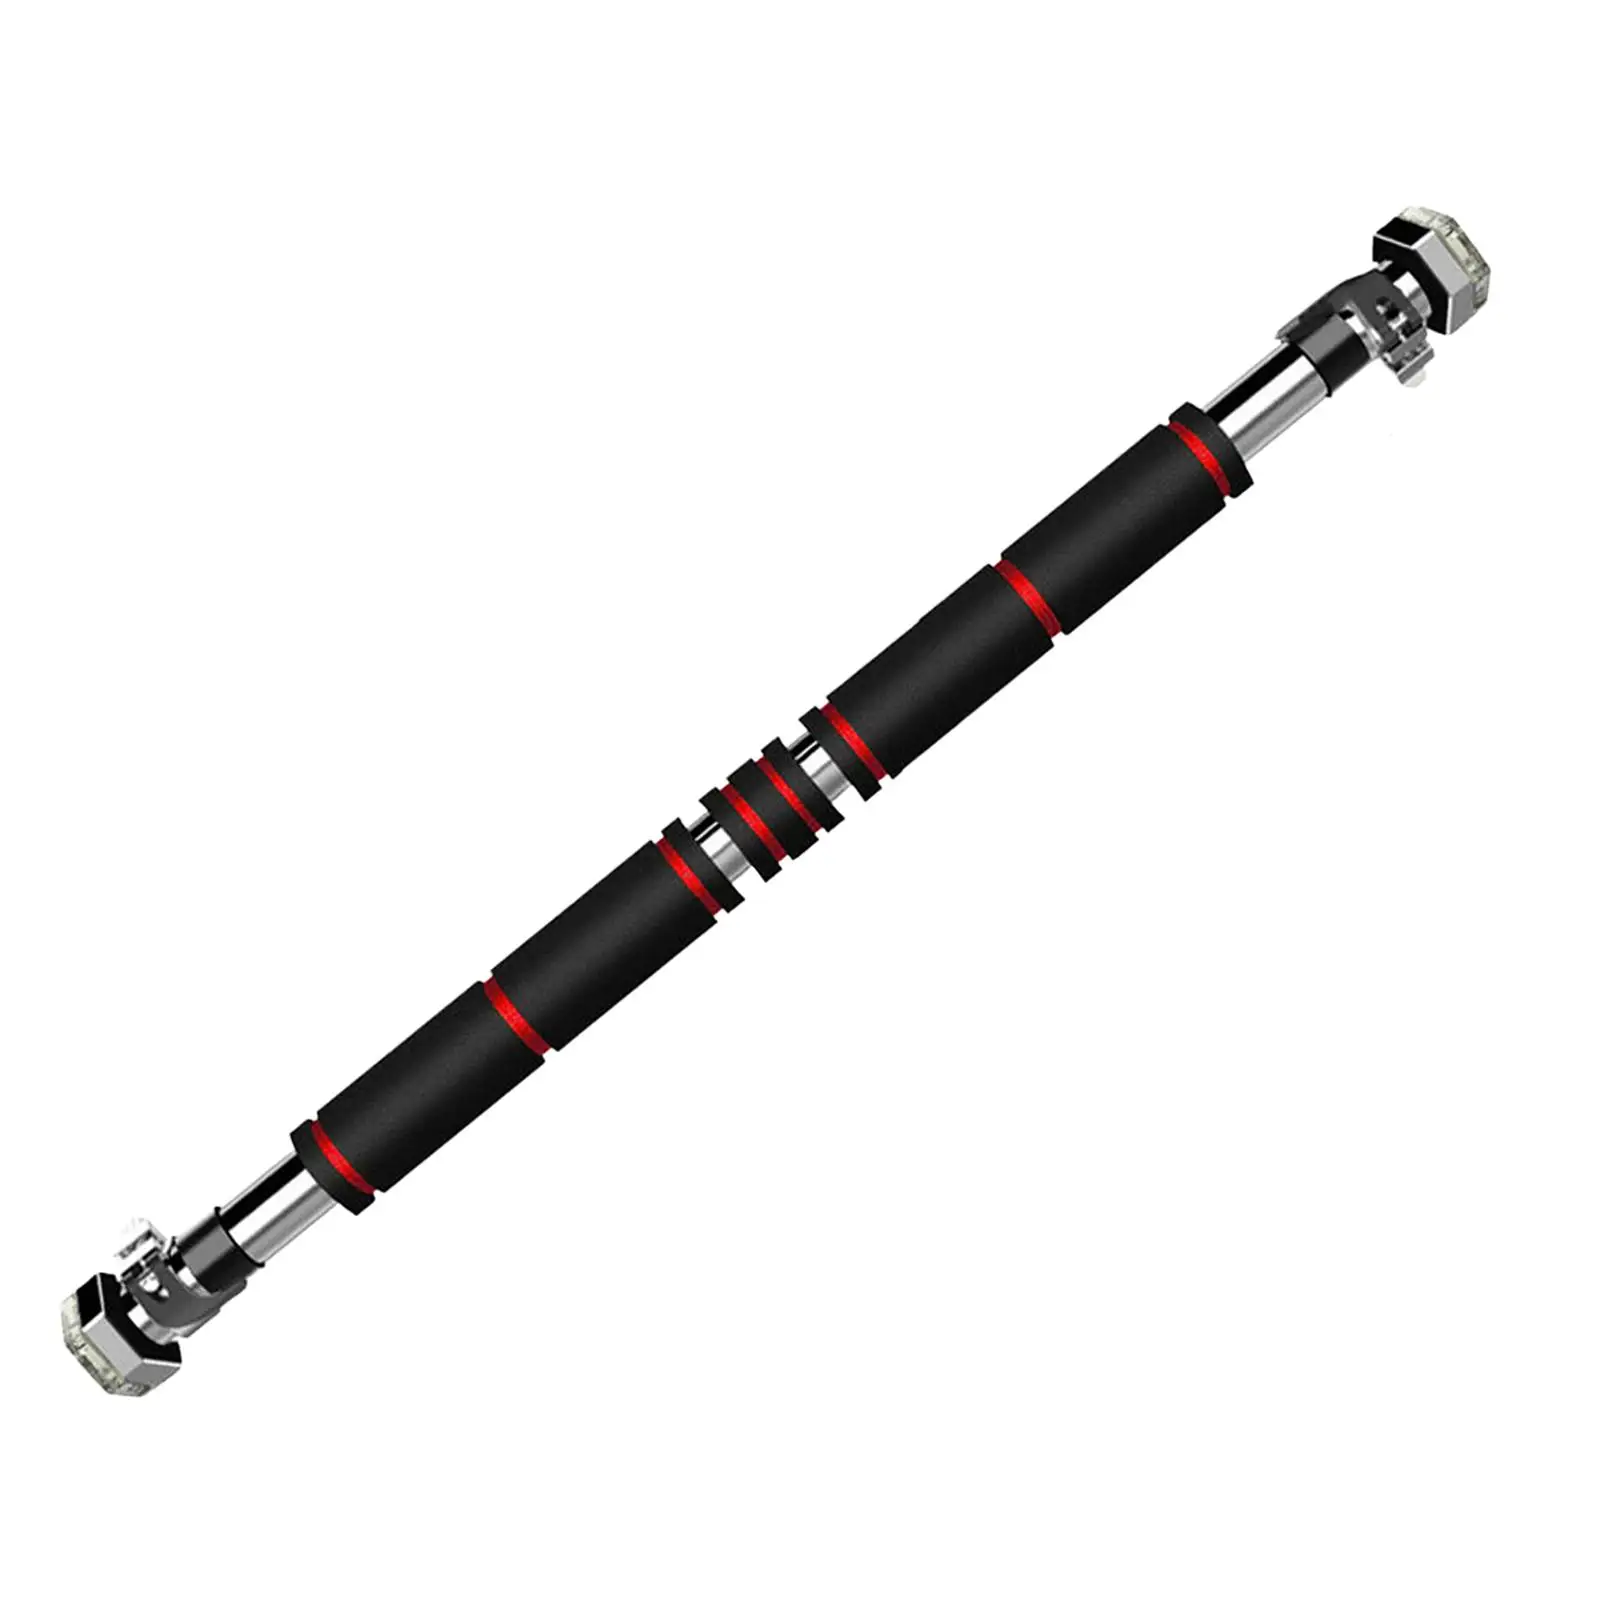 Pull up Bar with Safety Lock 31.5 to 51.2 Inches Adjustable Length Heavy Duty